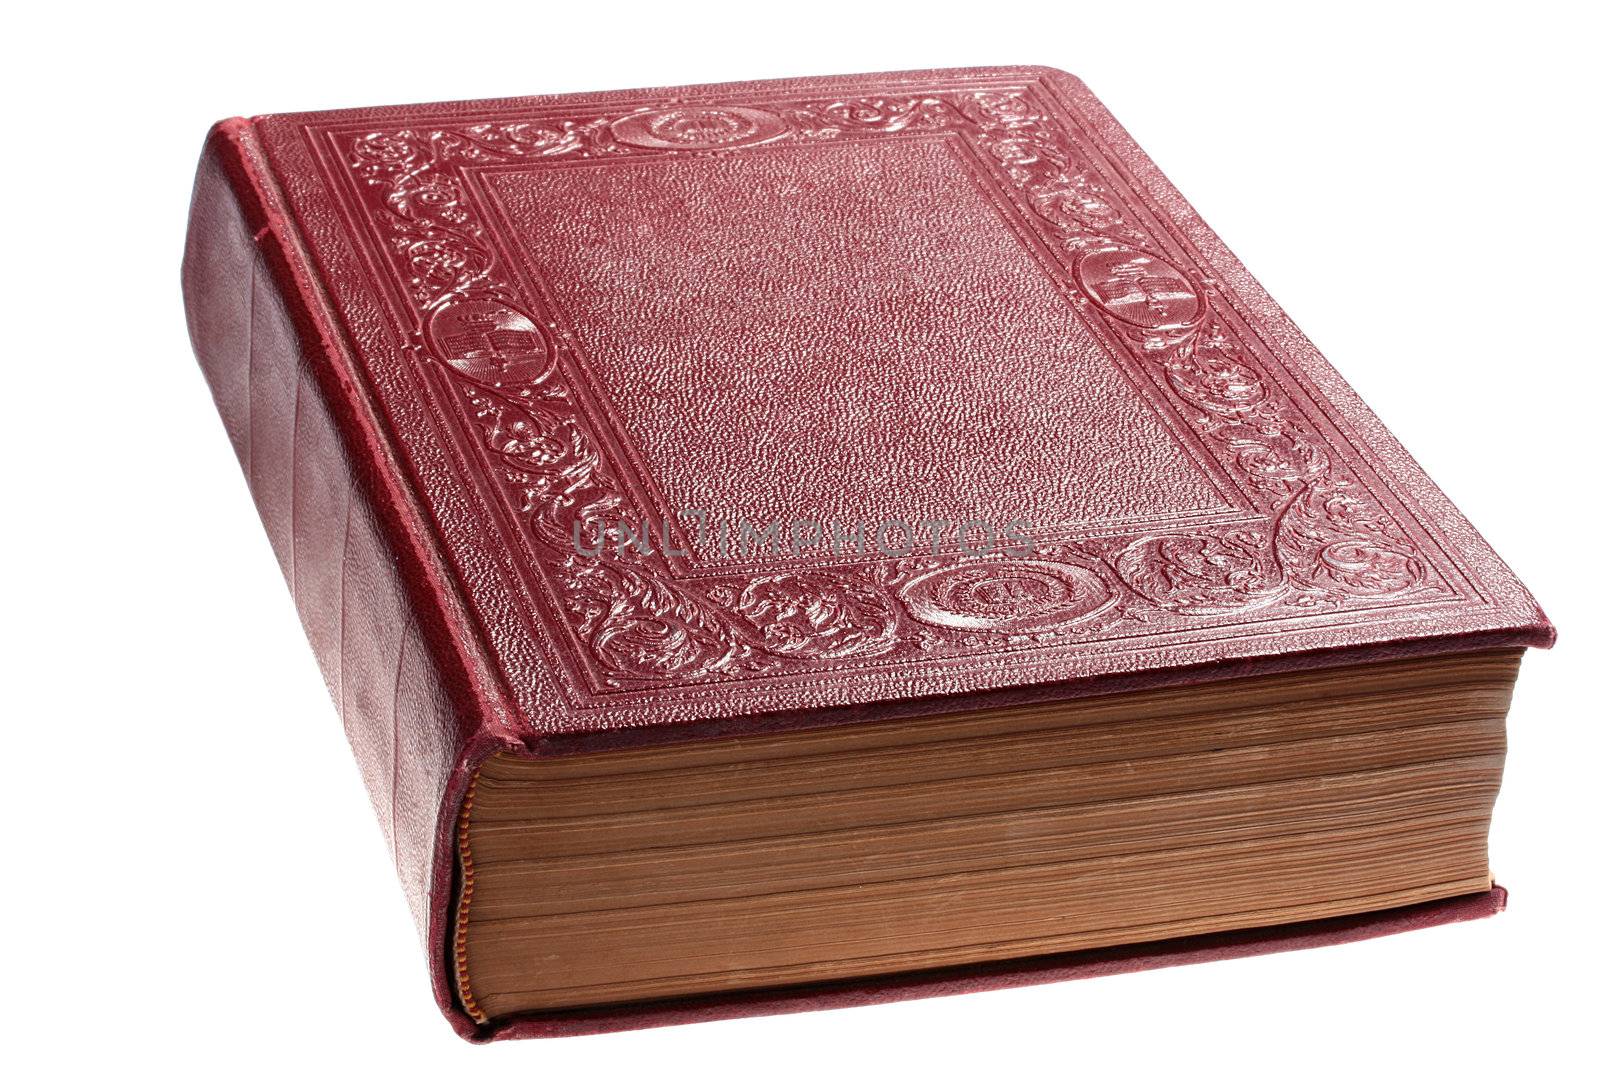 The ancient closed book in darkly red cover on a white background.